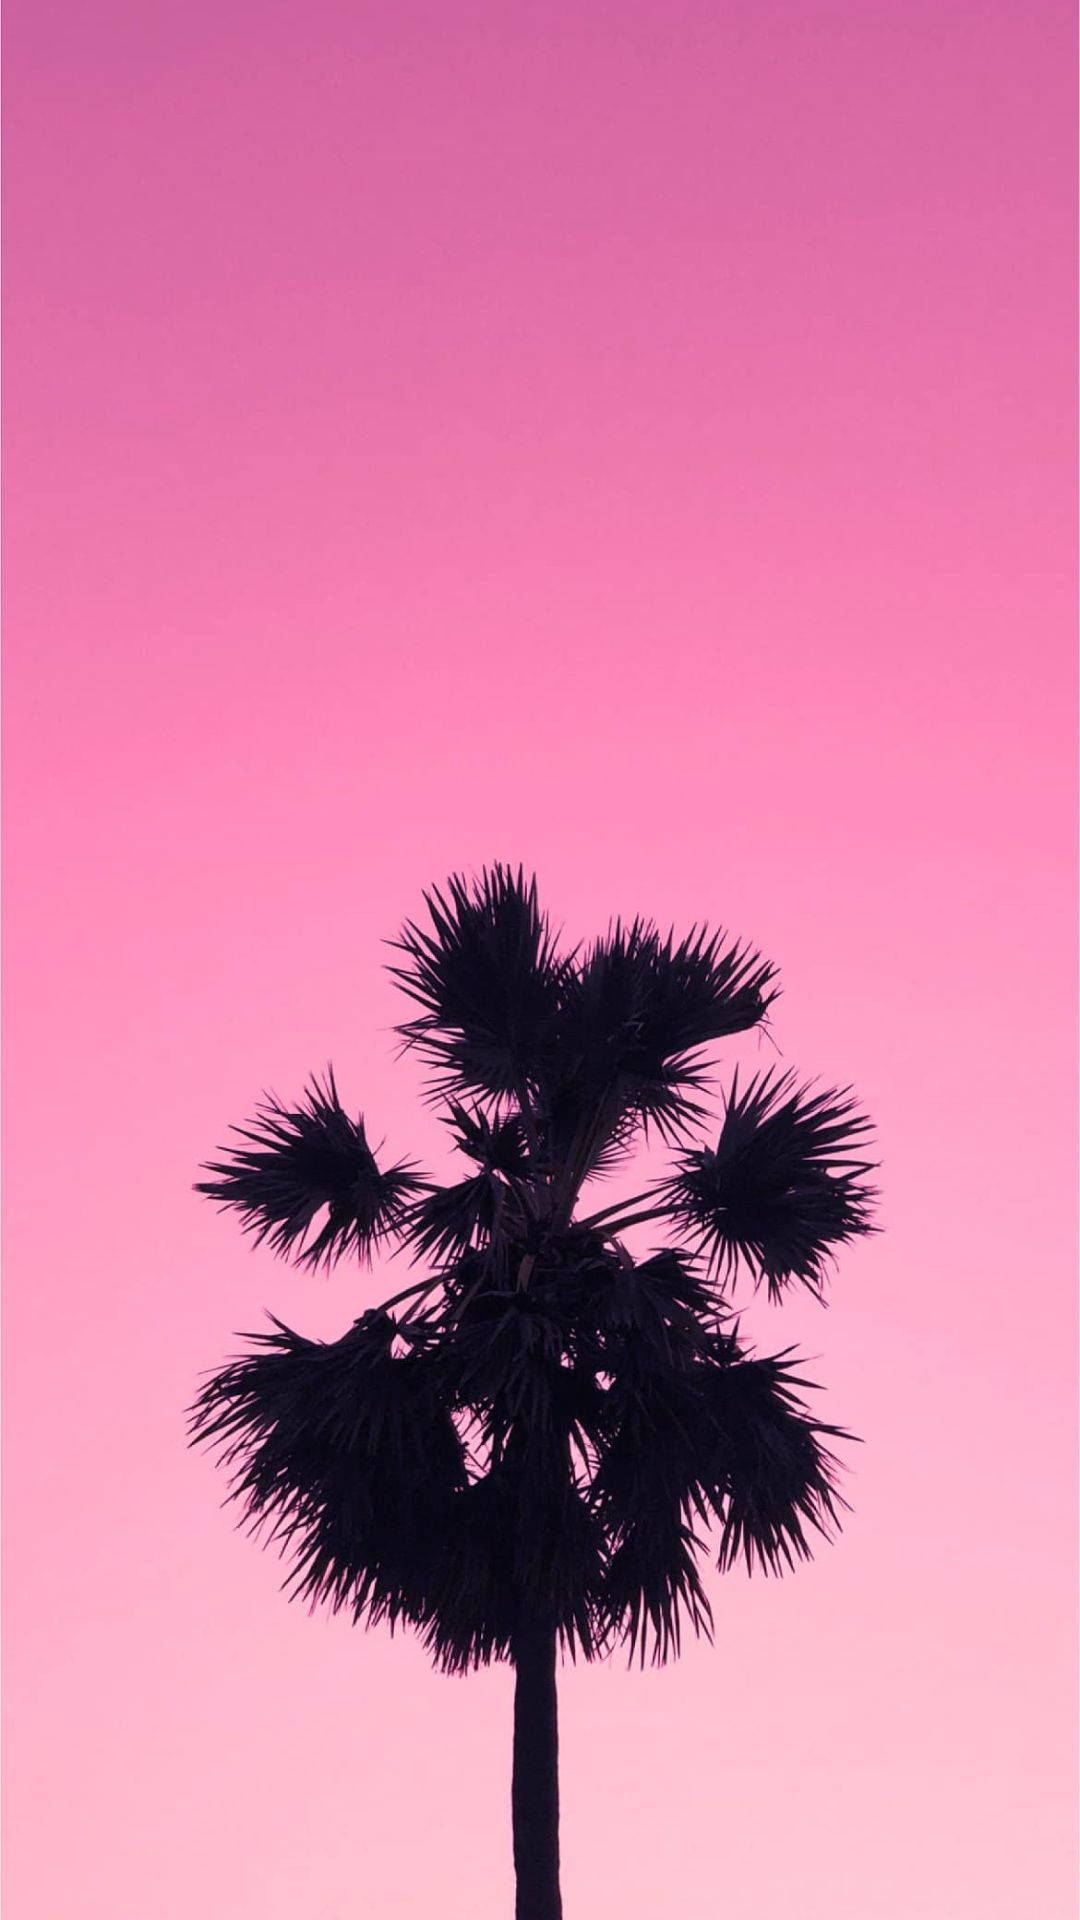 Palm Tree On Aesthetic Pink Sky Wallpaper